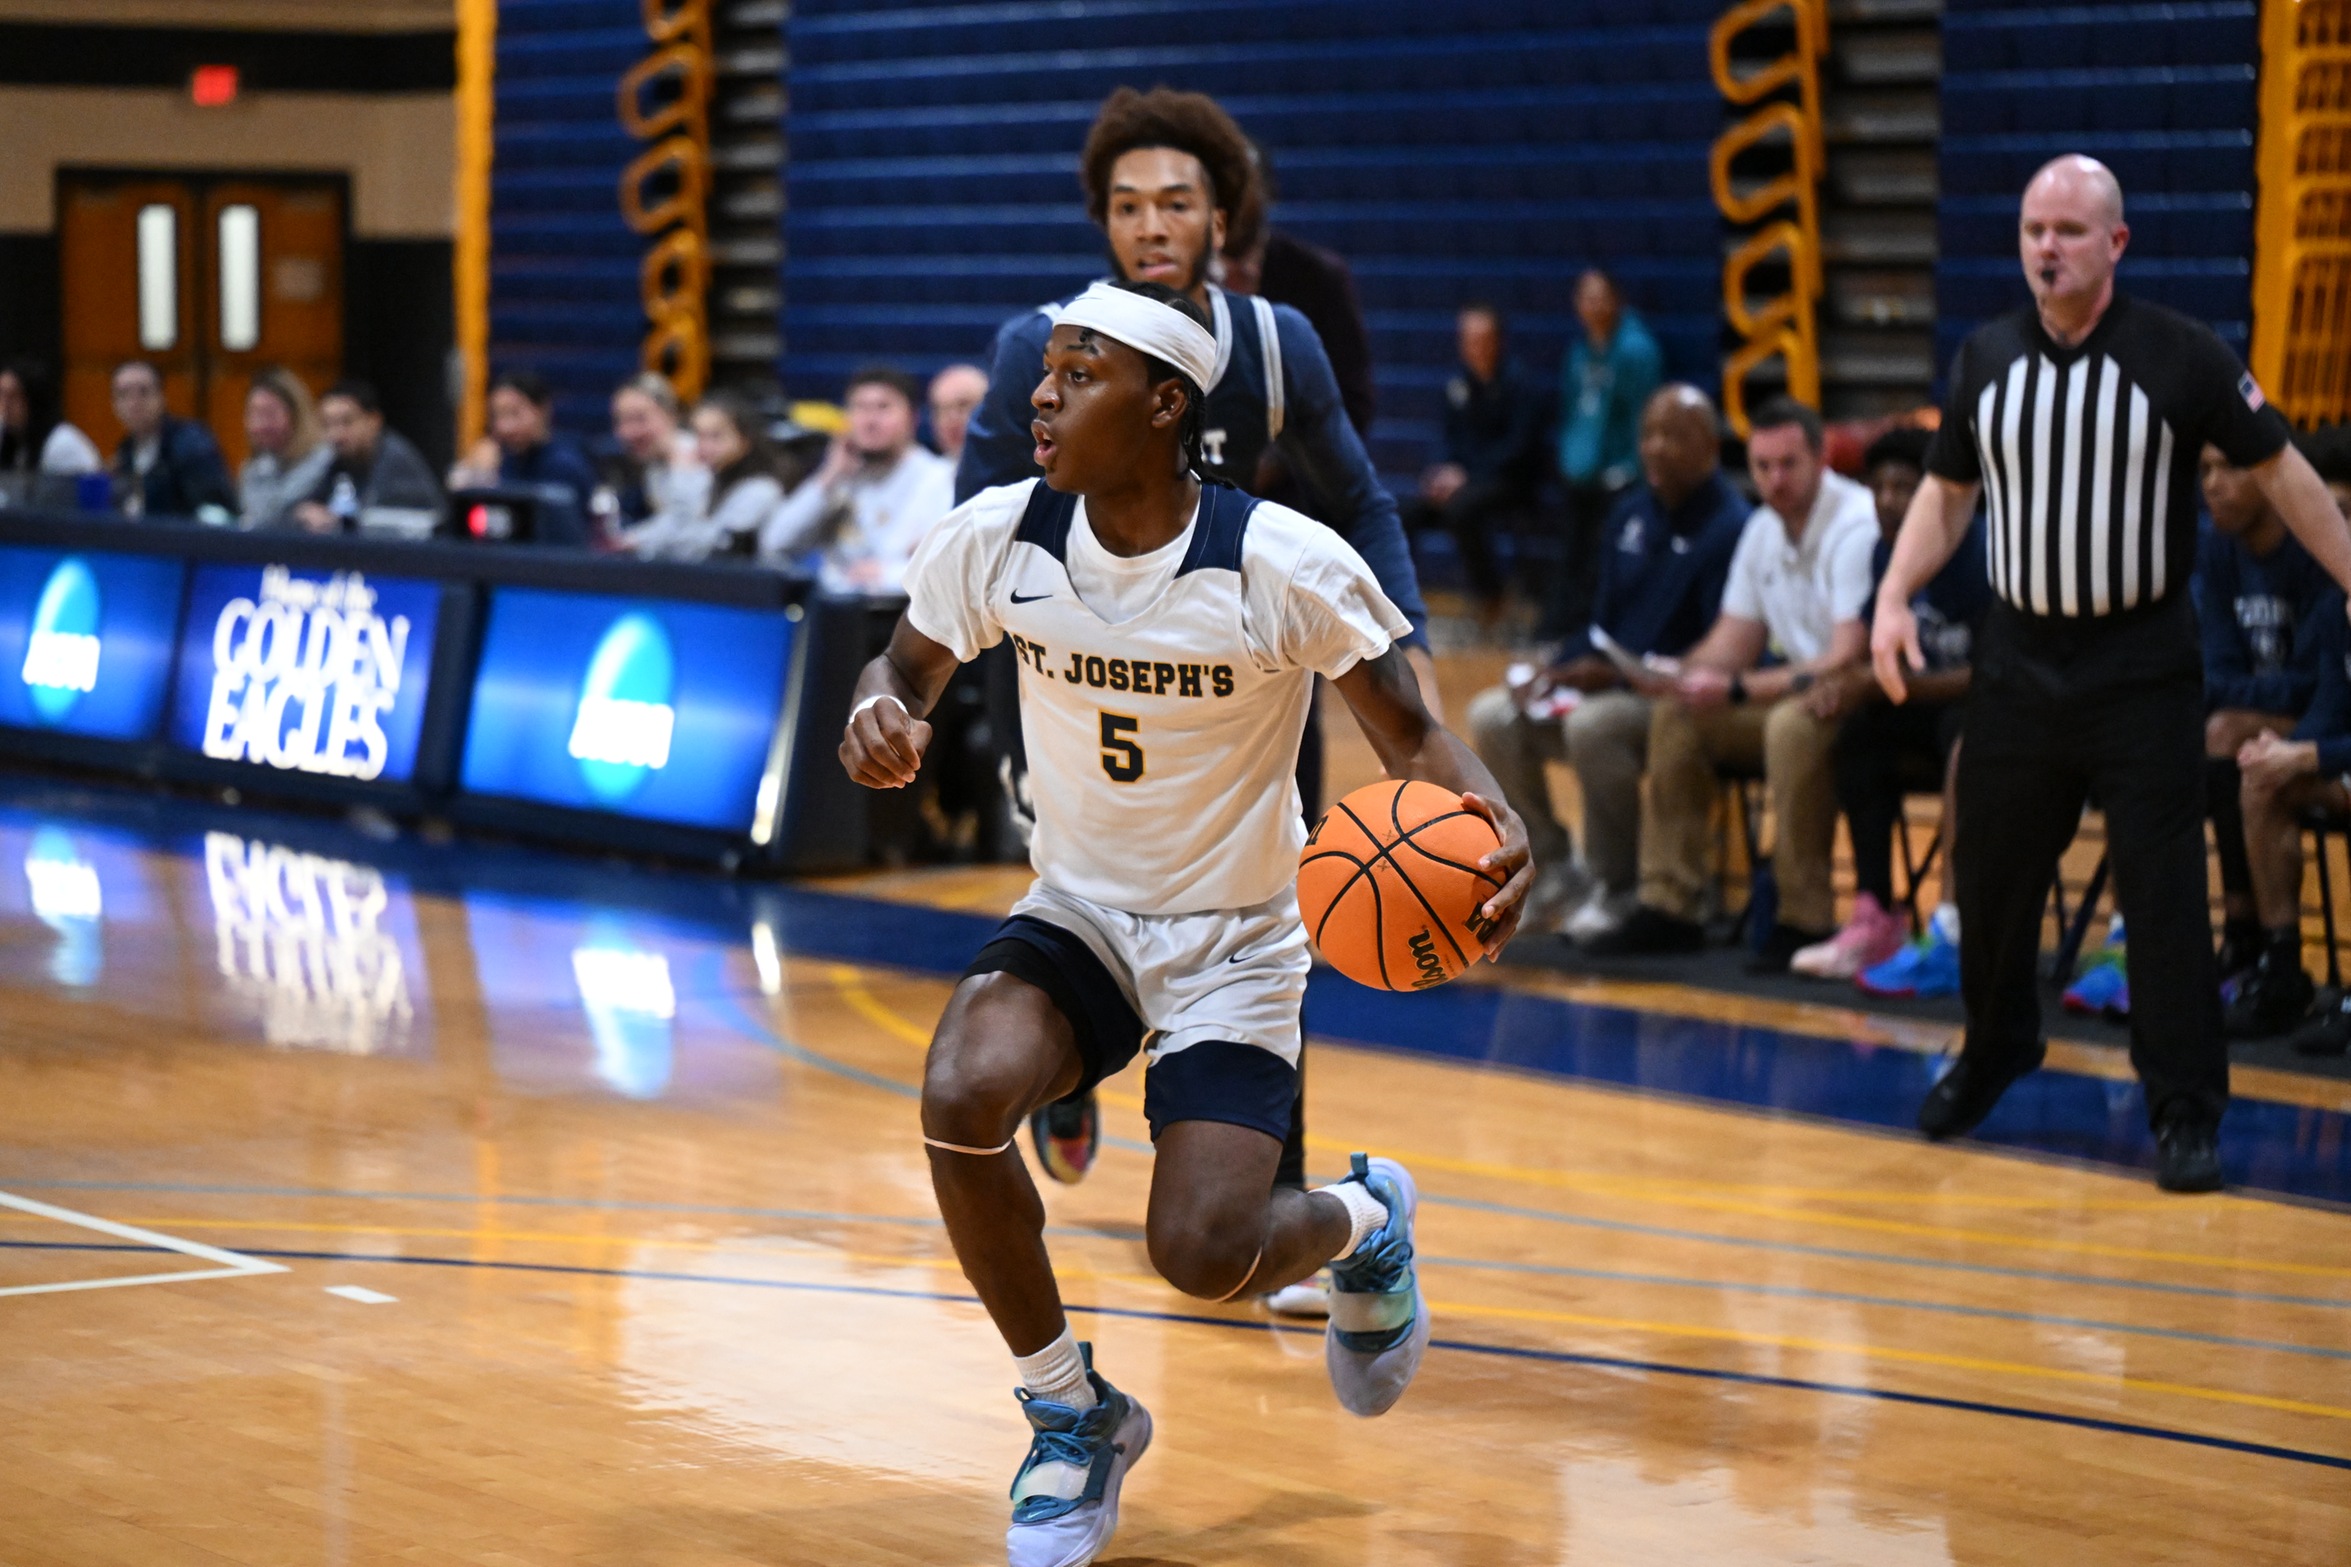 Men's Basketball Takes Down Yeshiva for First Conference Victory